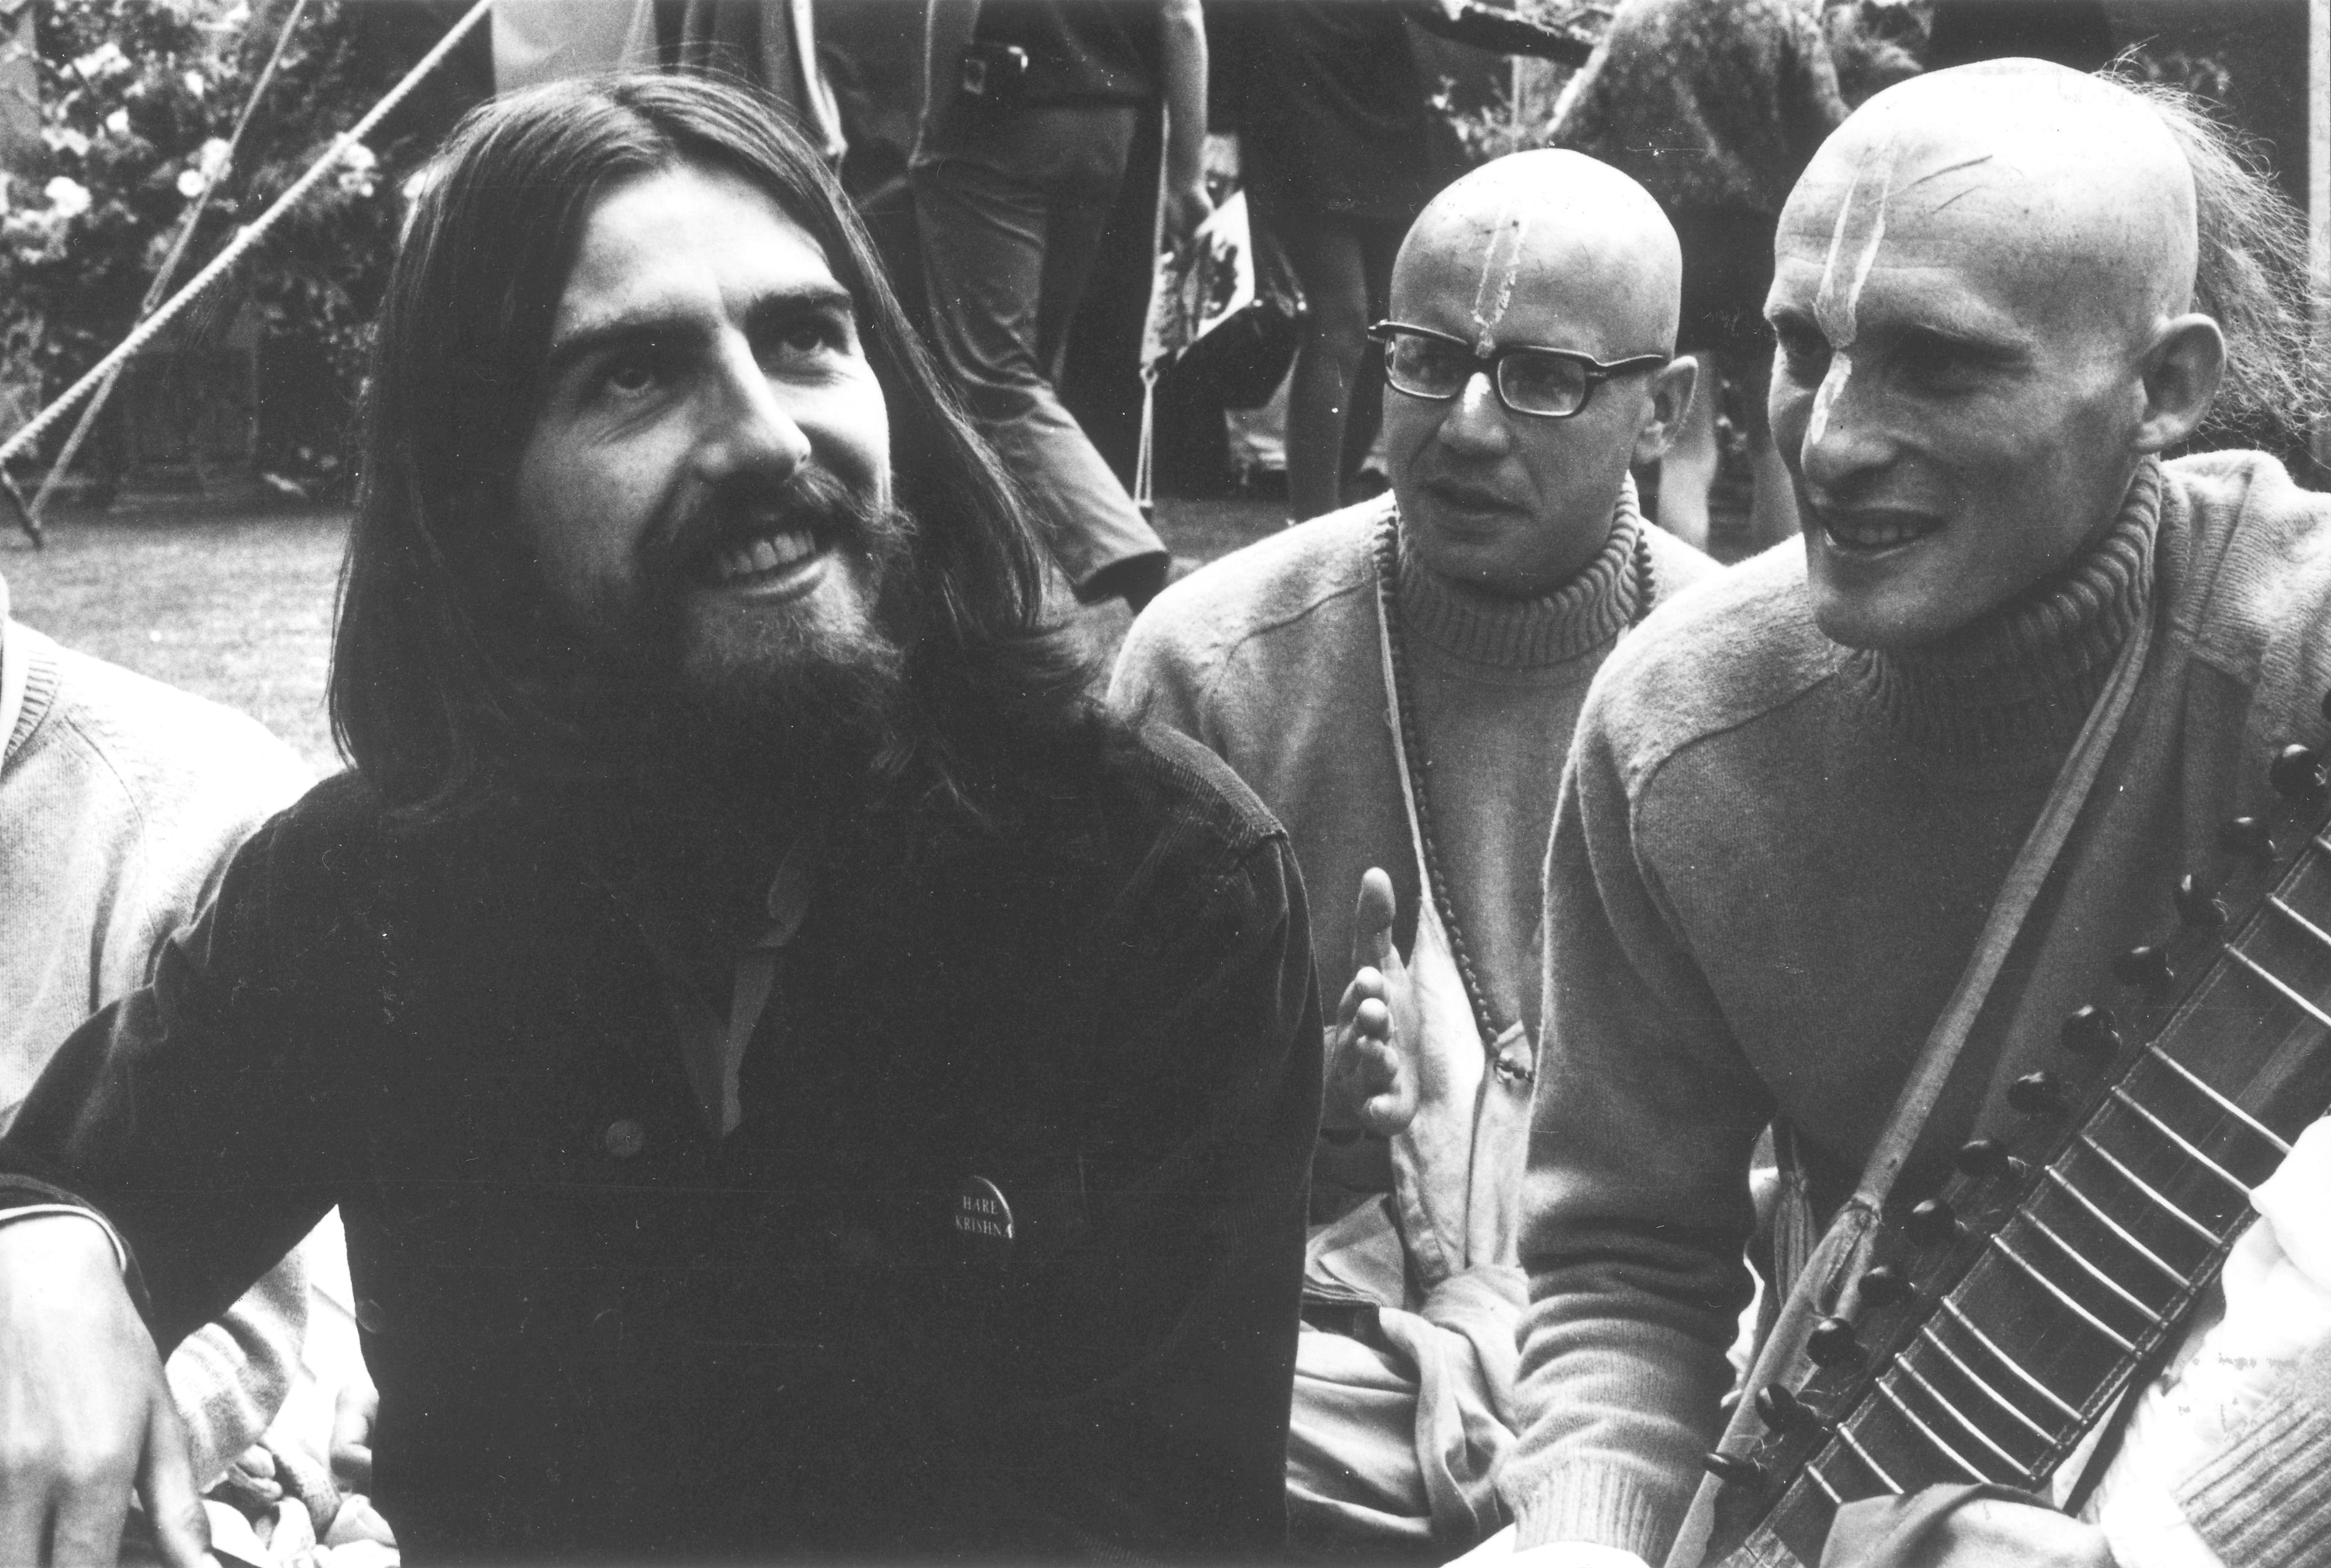 George Harrison sitting next to two men with shaved heads